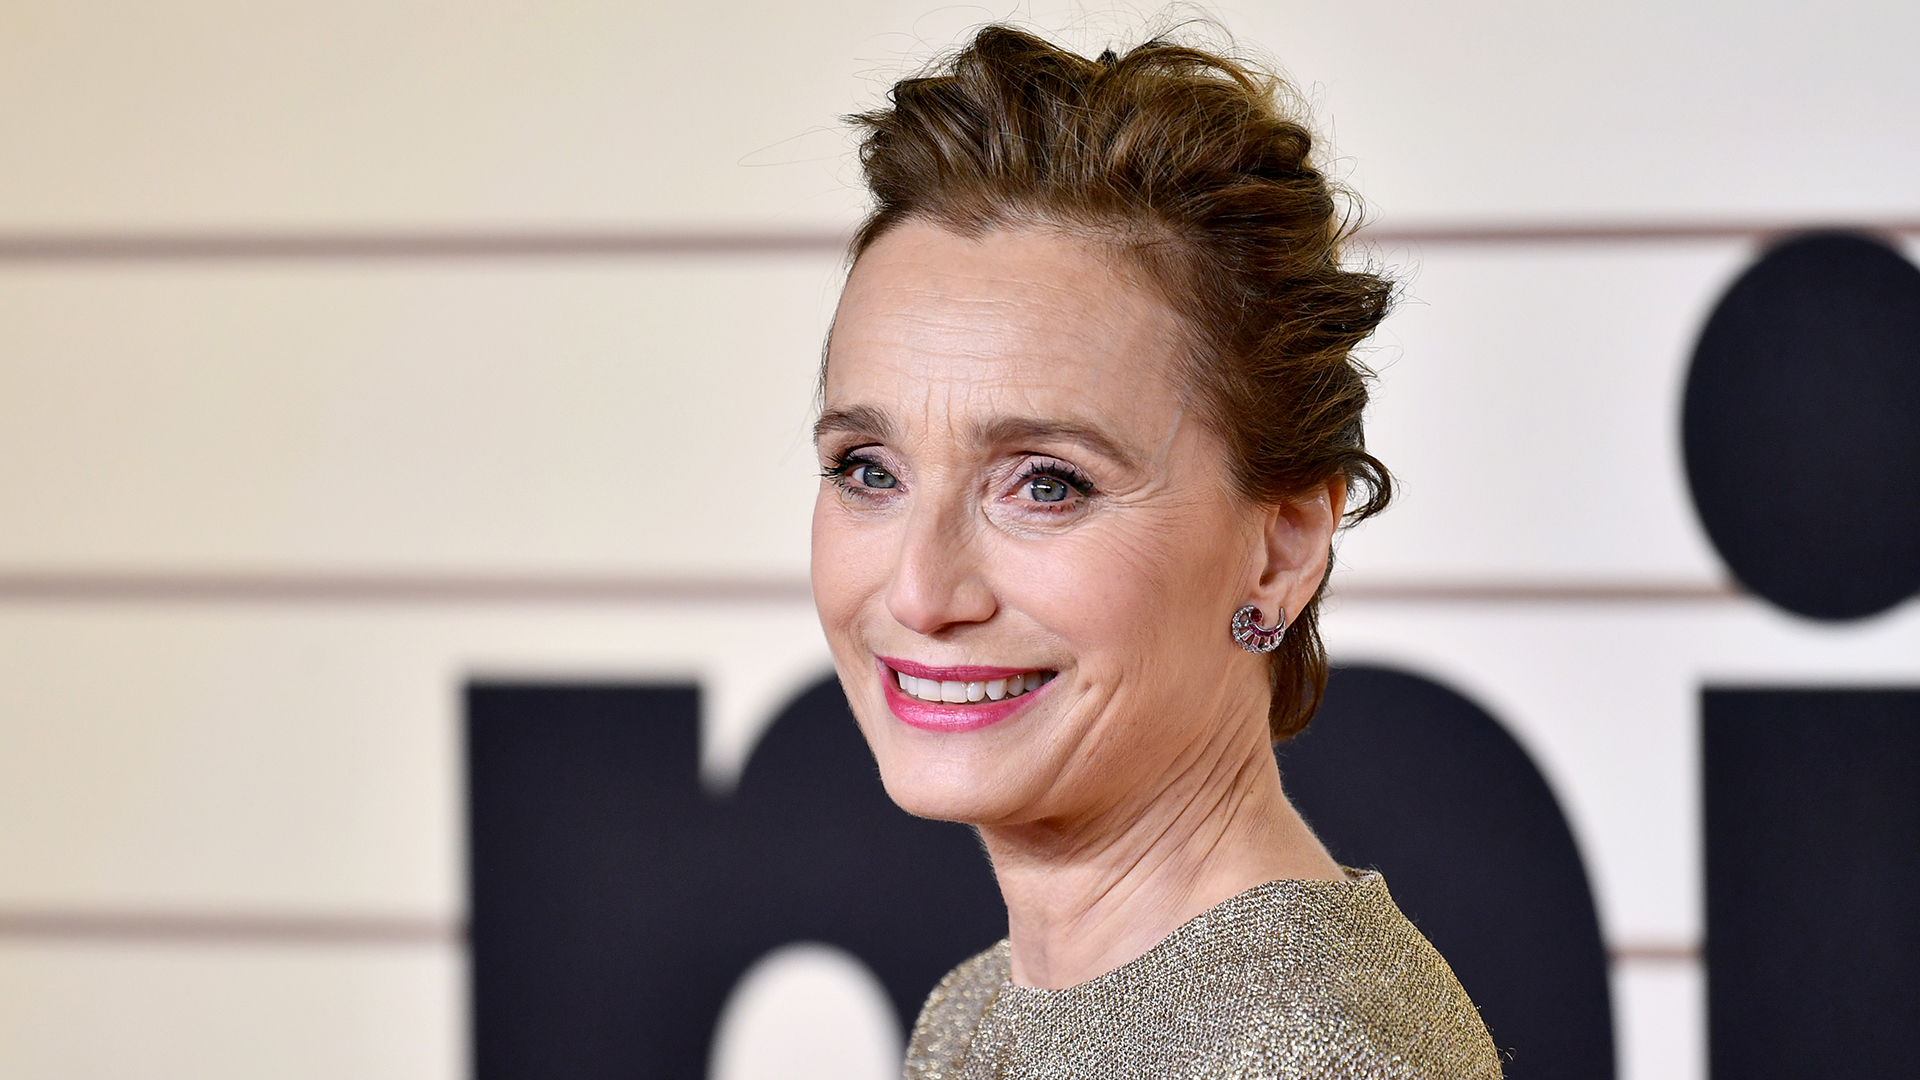 Kristin Scott Thomas Makes Her Feature Directorial Debut With ‘The Sea Change’ 